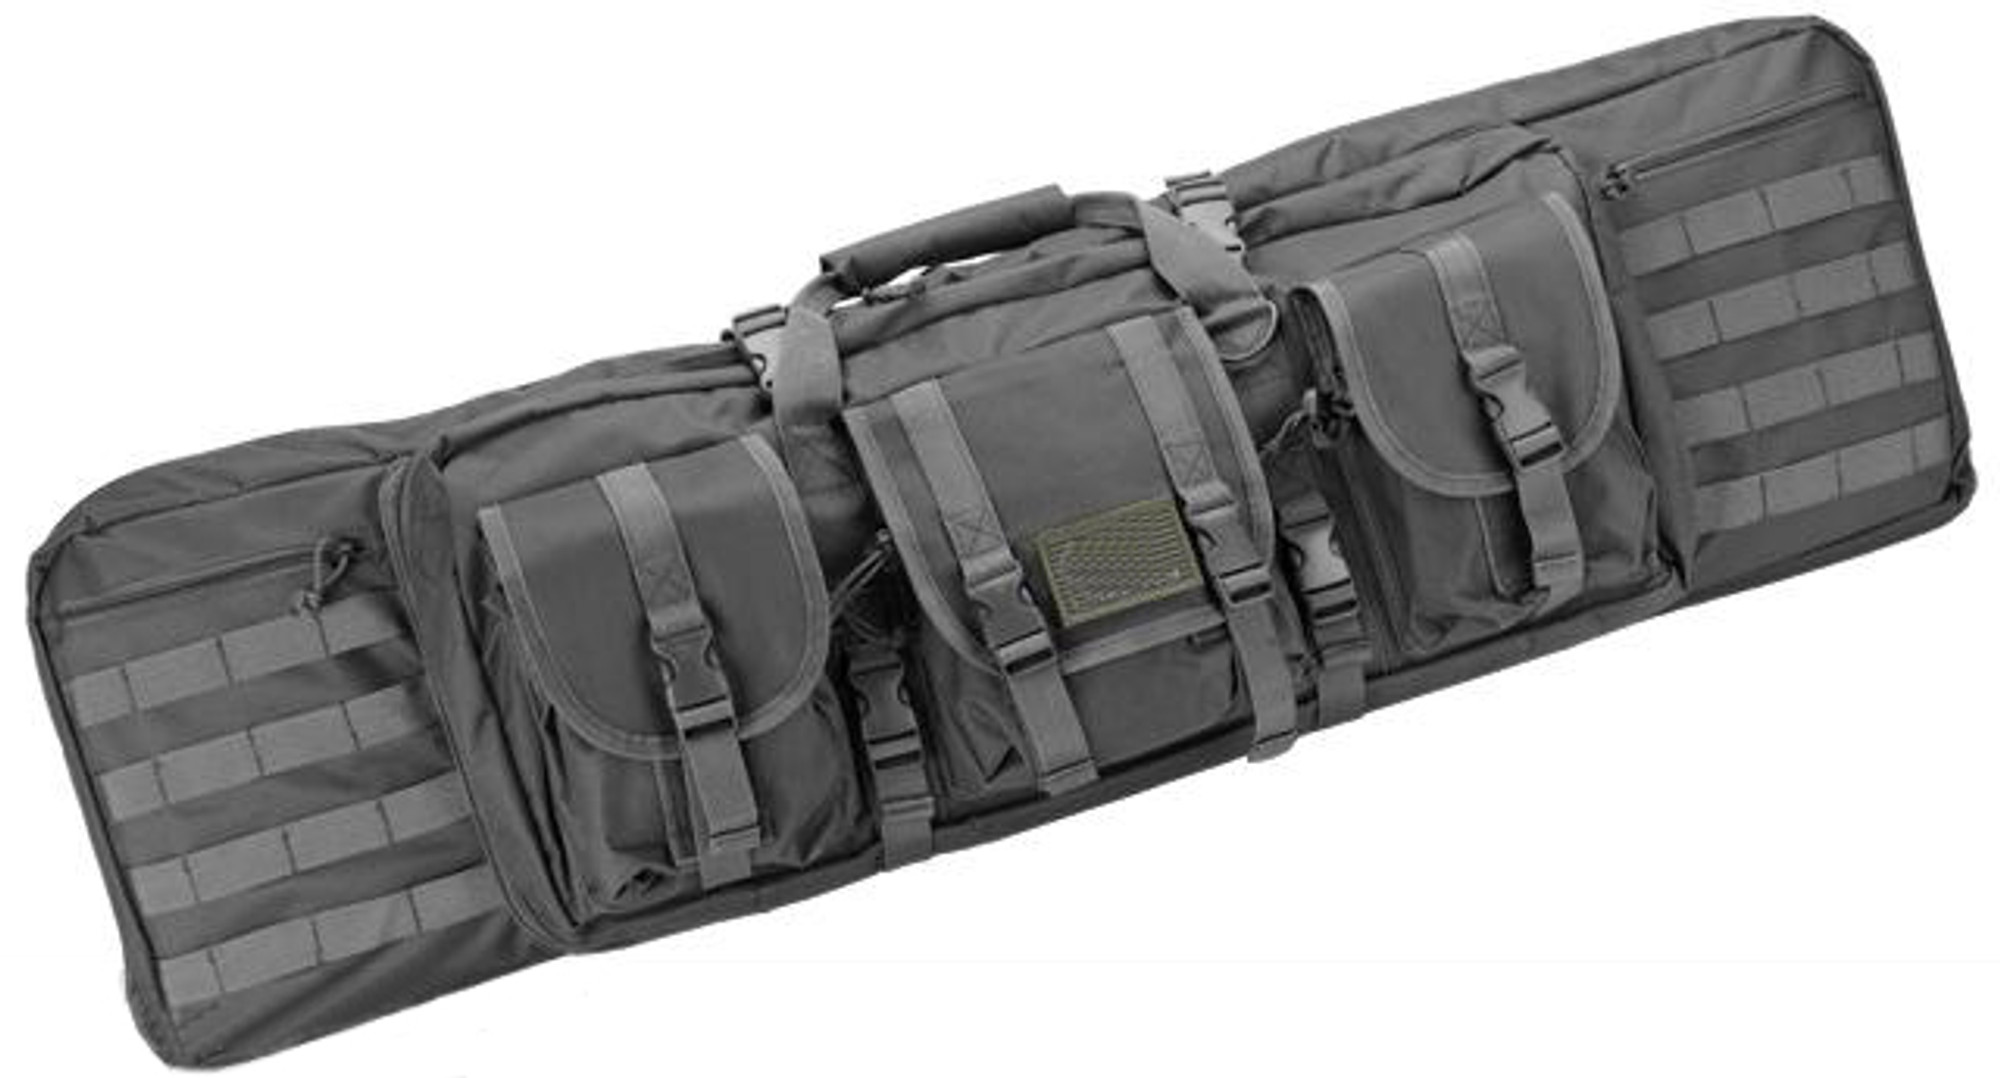 Combat Featured 42" Ultimate Dual Weapon Case Rifle Bag (Black)